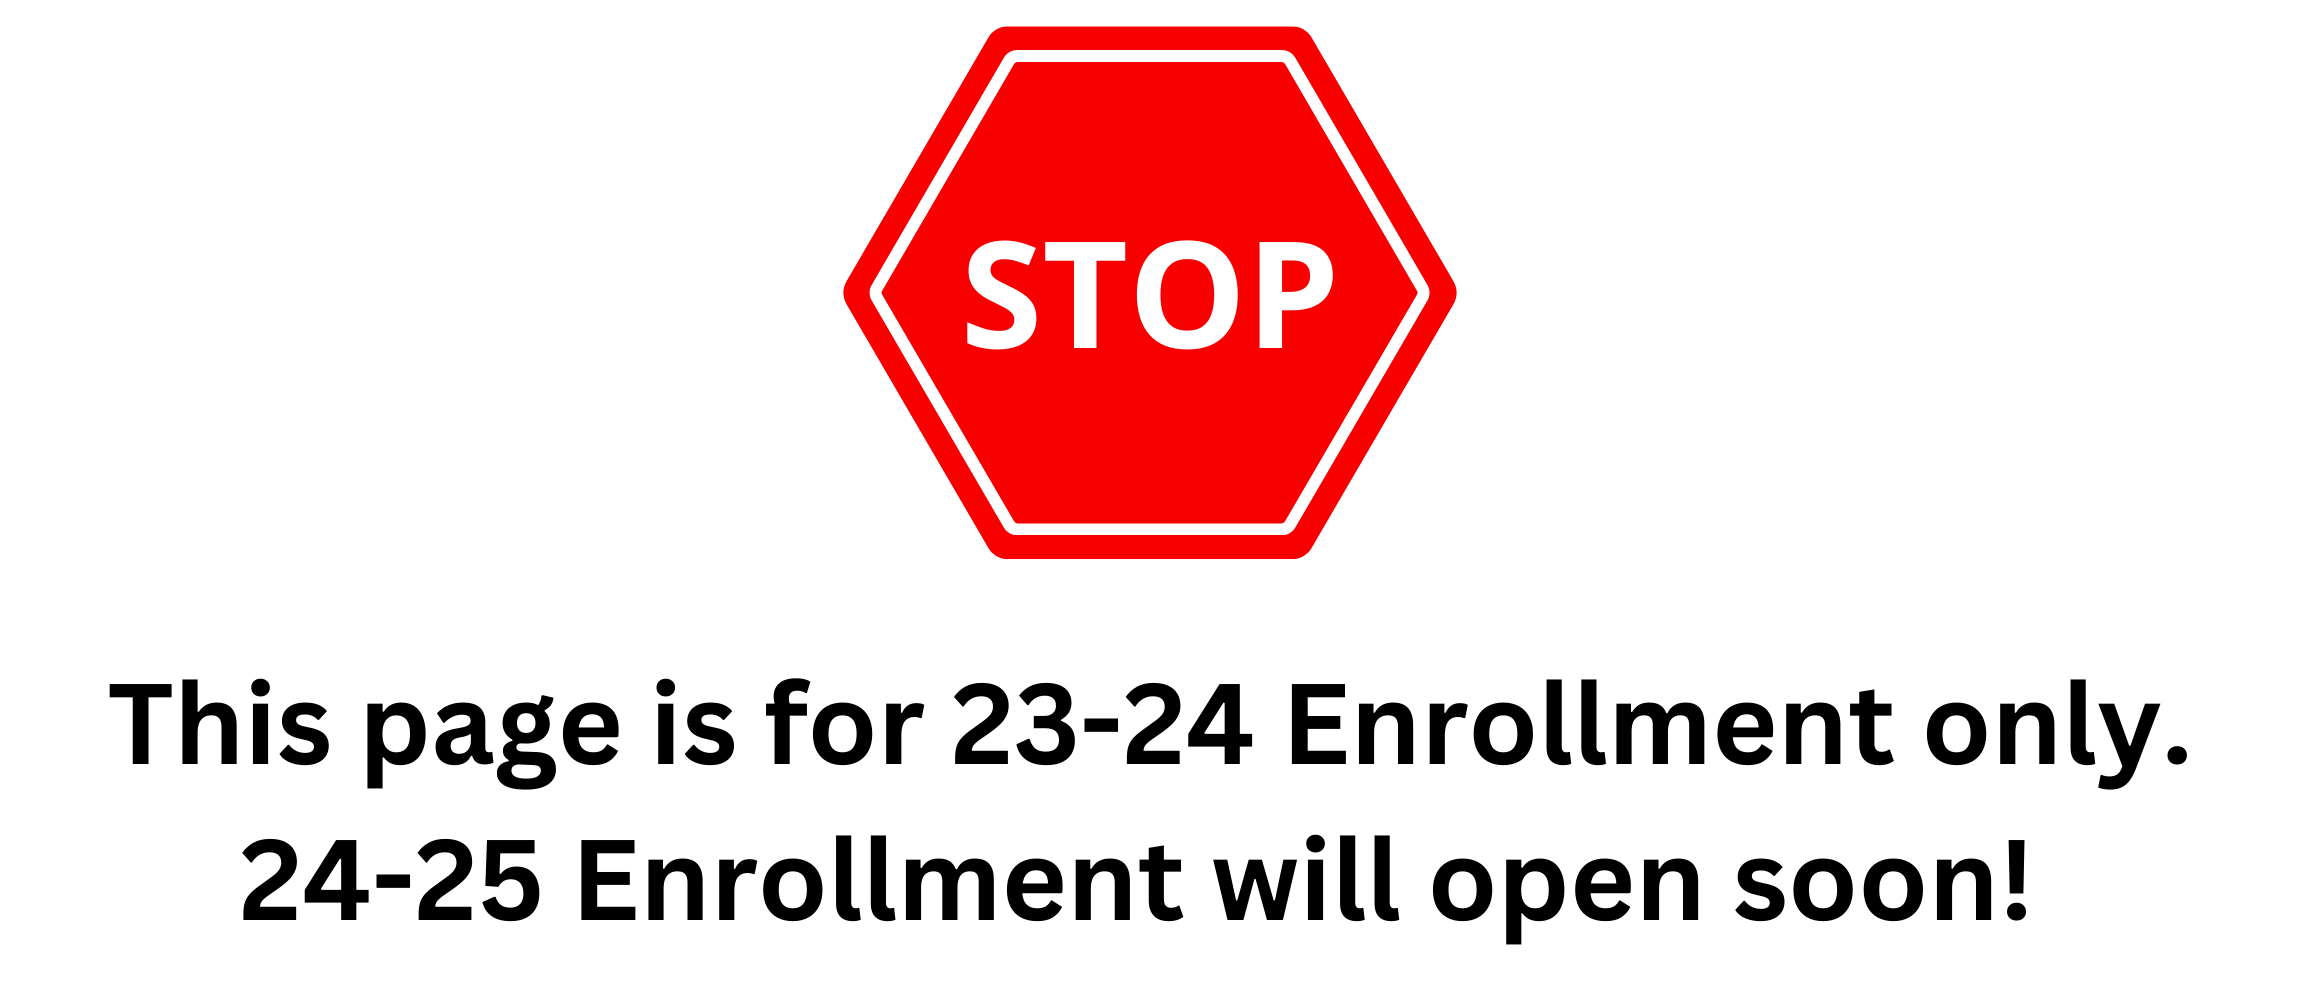 stop sign- This page is for 23-24 Enrollment only. 24-25 Enrollment will open soon! 